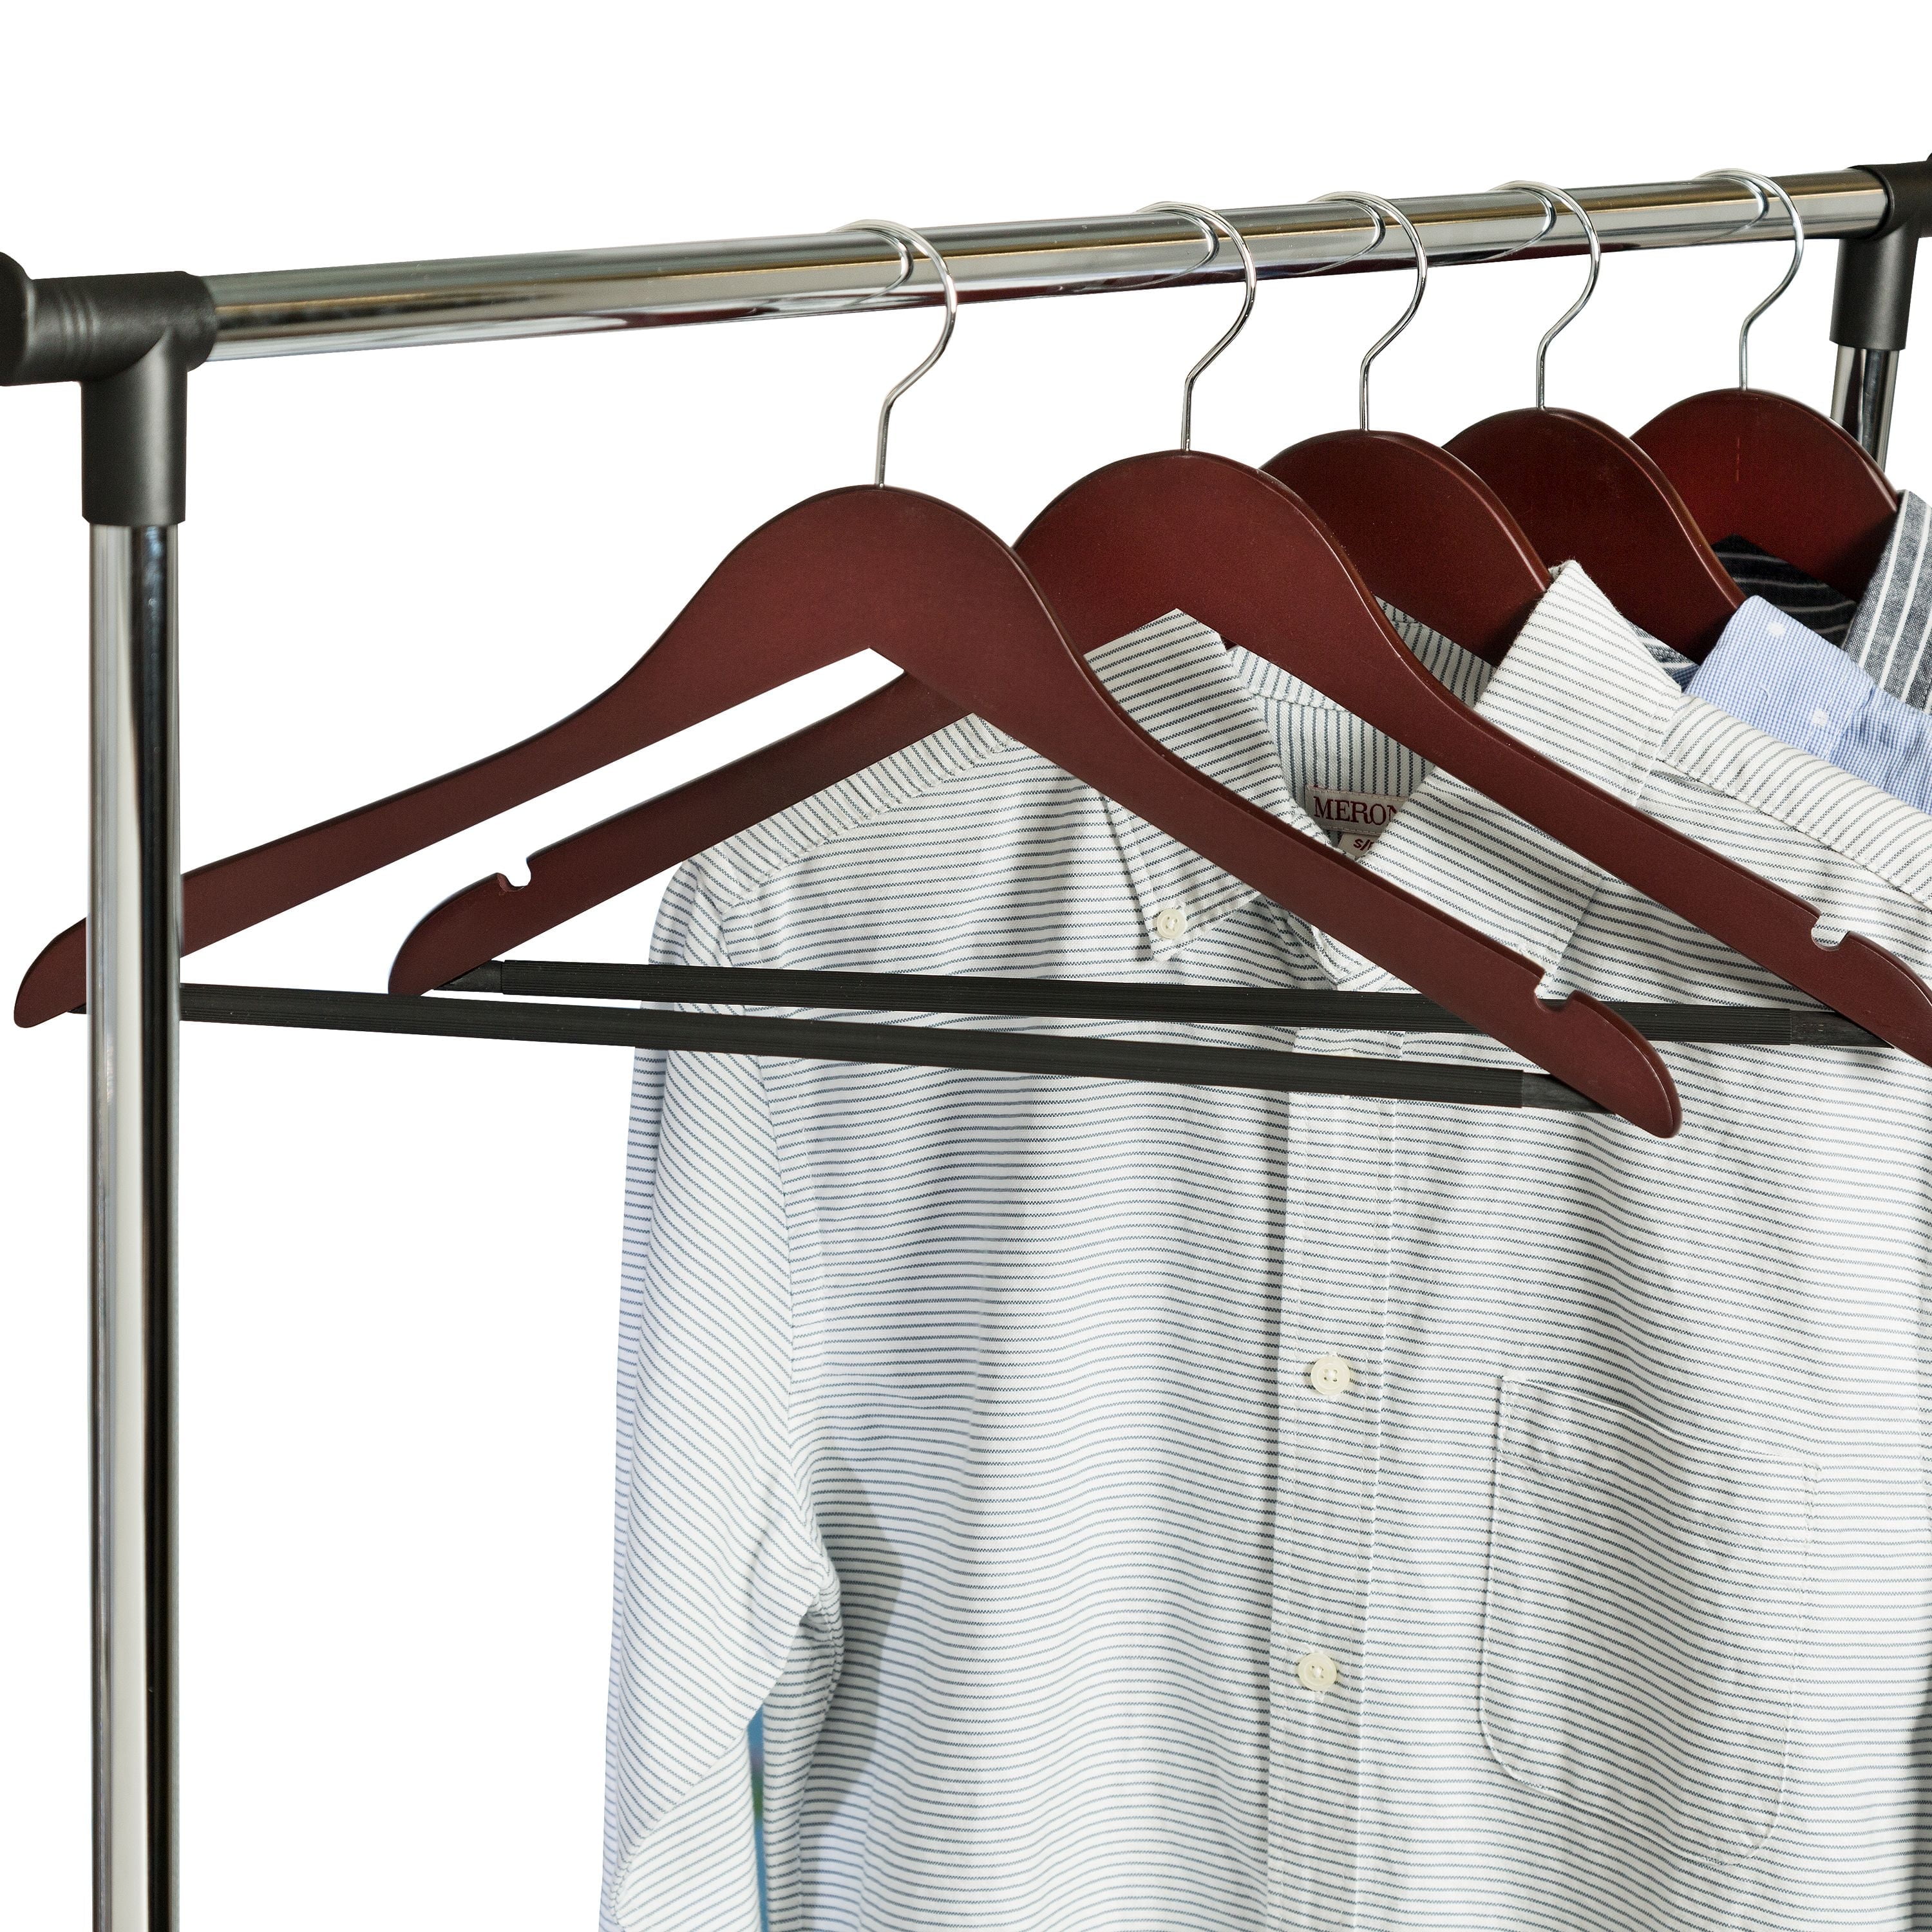 Bend & Hook  Perfect Hanger - Time to upgrade your closet